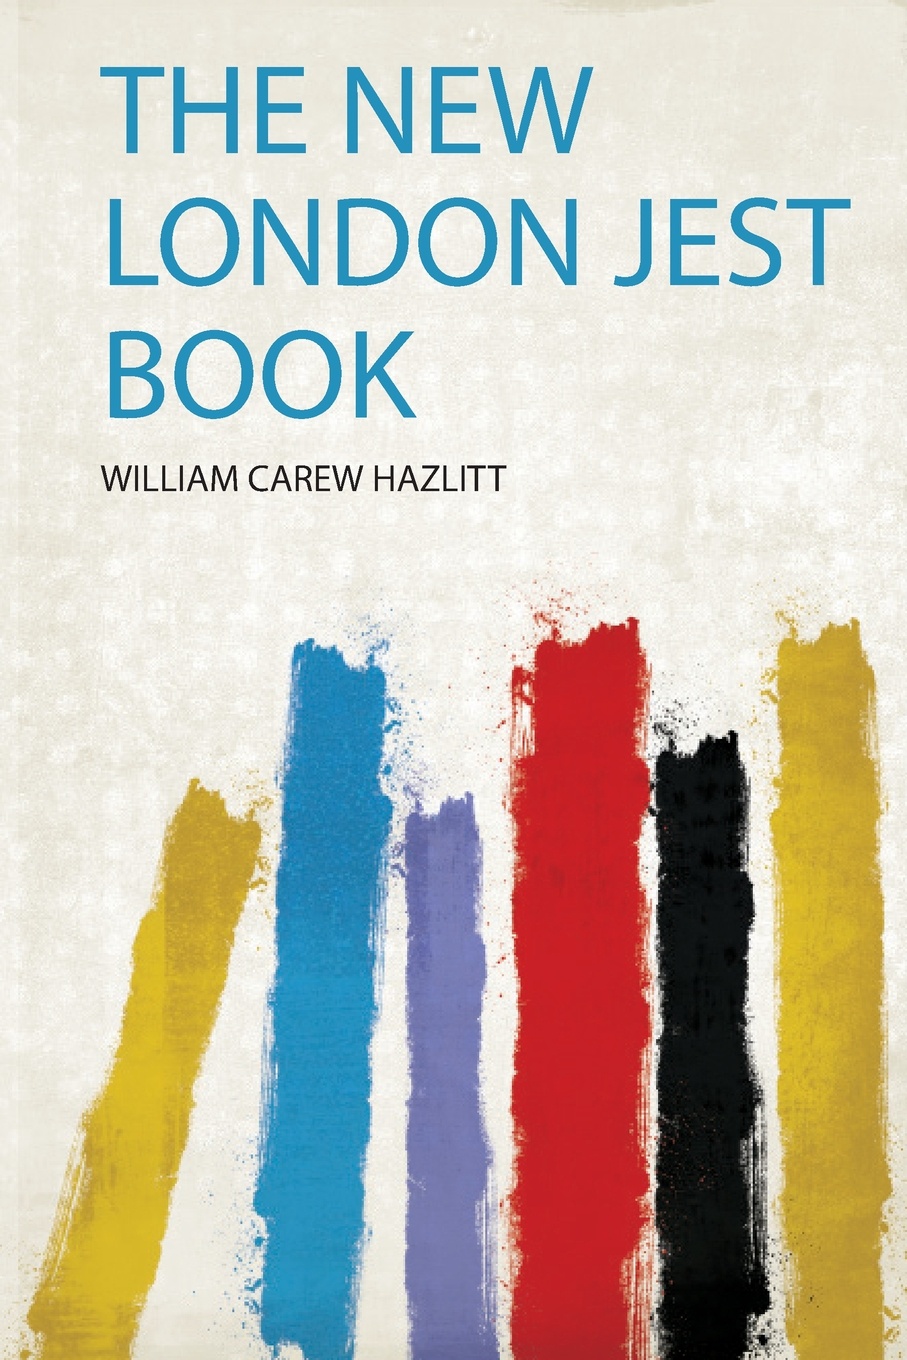 The New London Jest Book